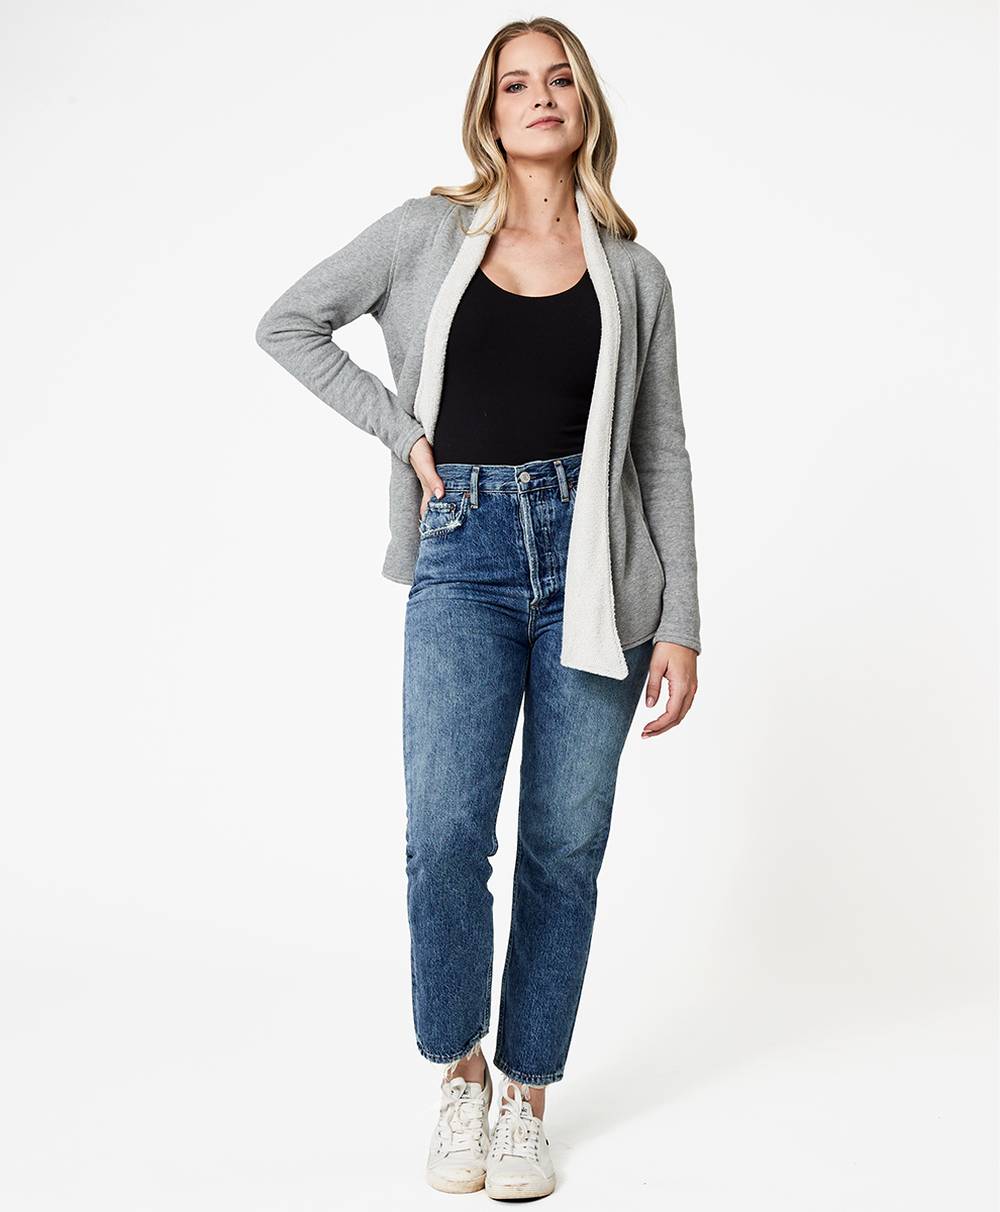 pact timeless cozy cardigan sweaters